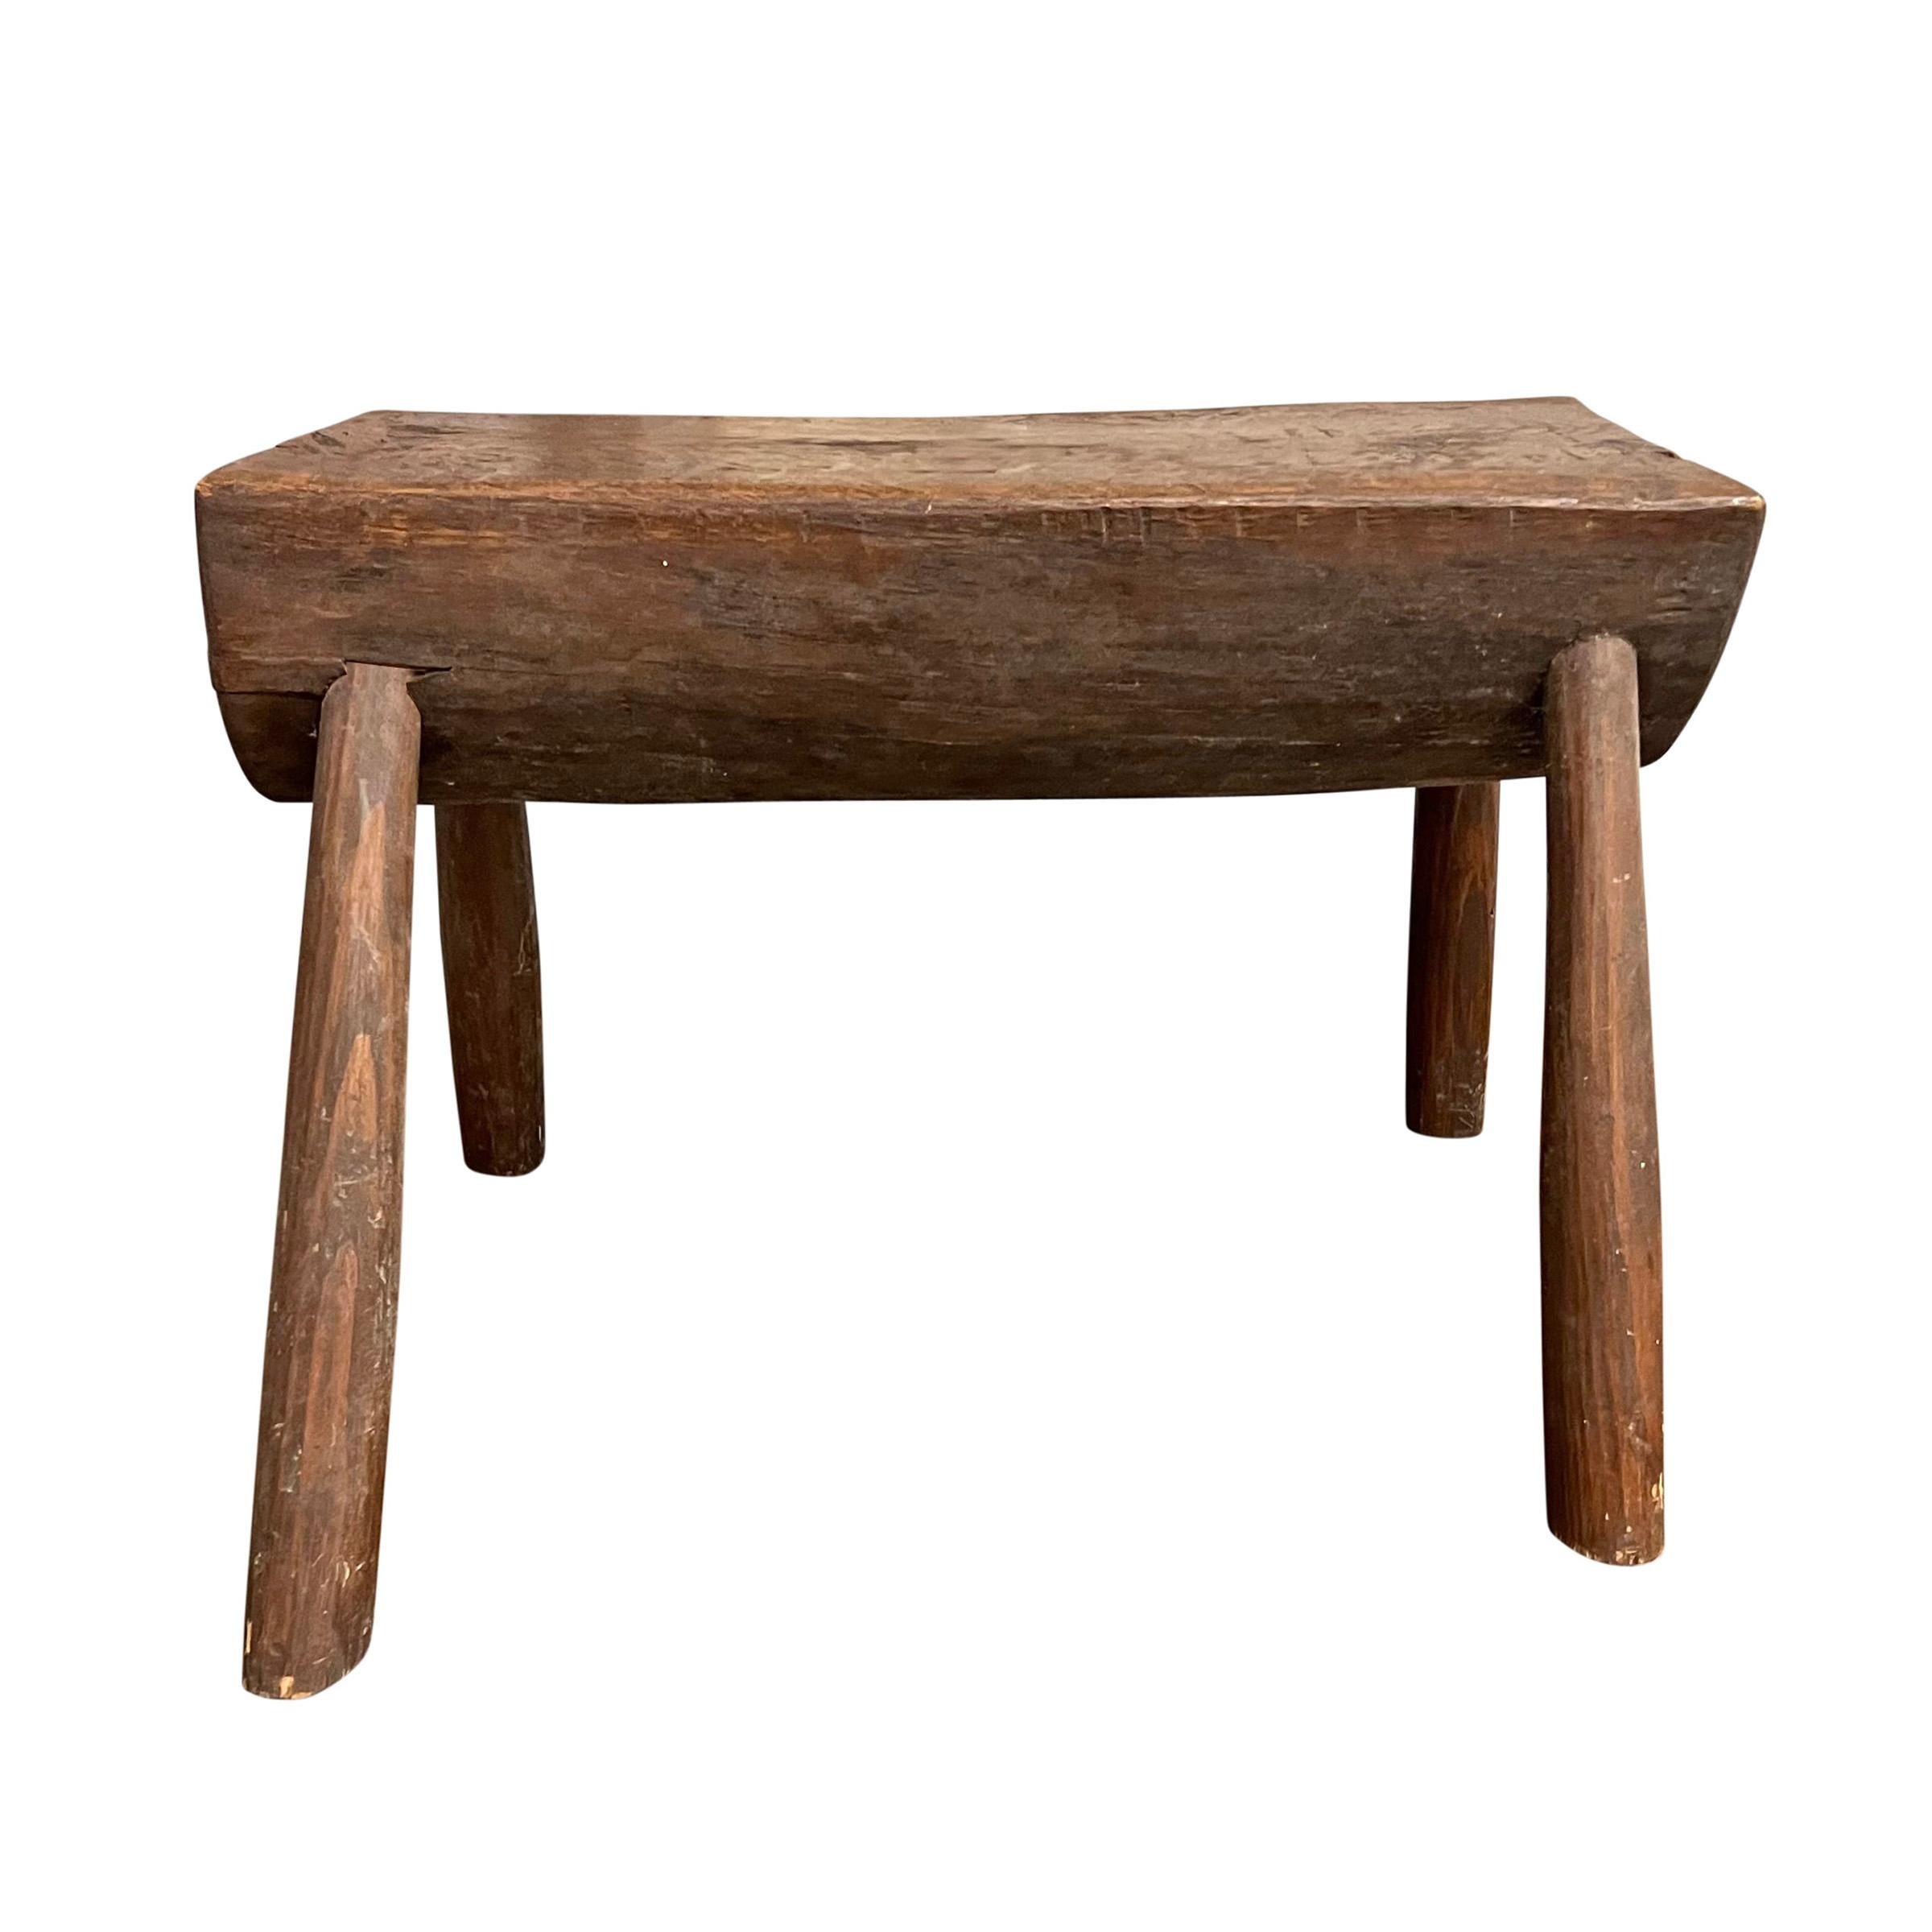 Hand-Carved Early 20th Century American Primitive Milking Stool For Sale